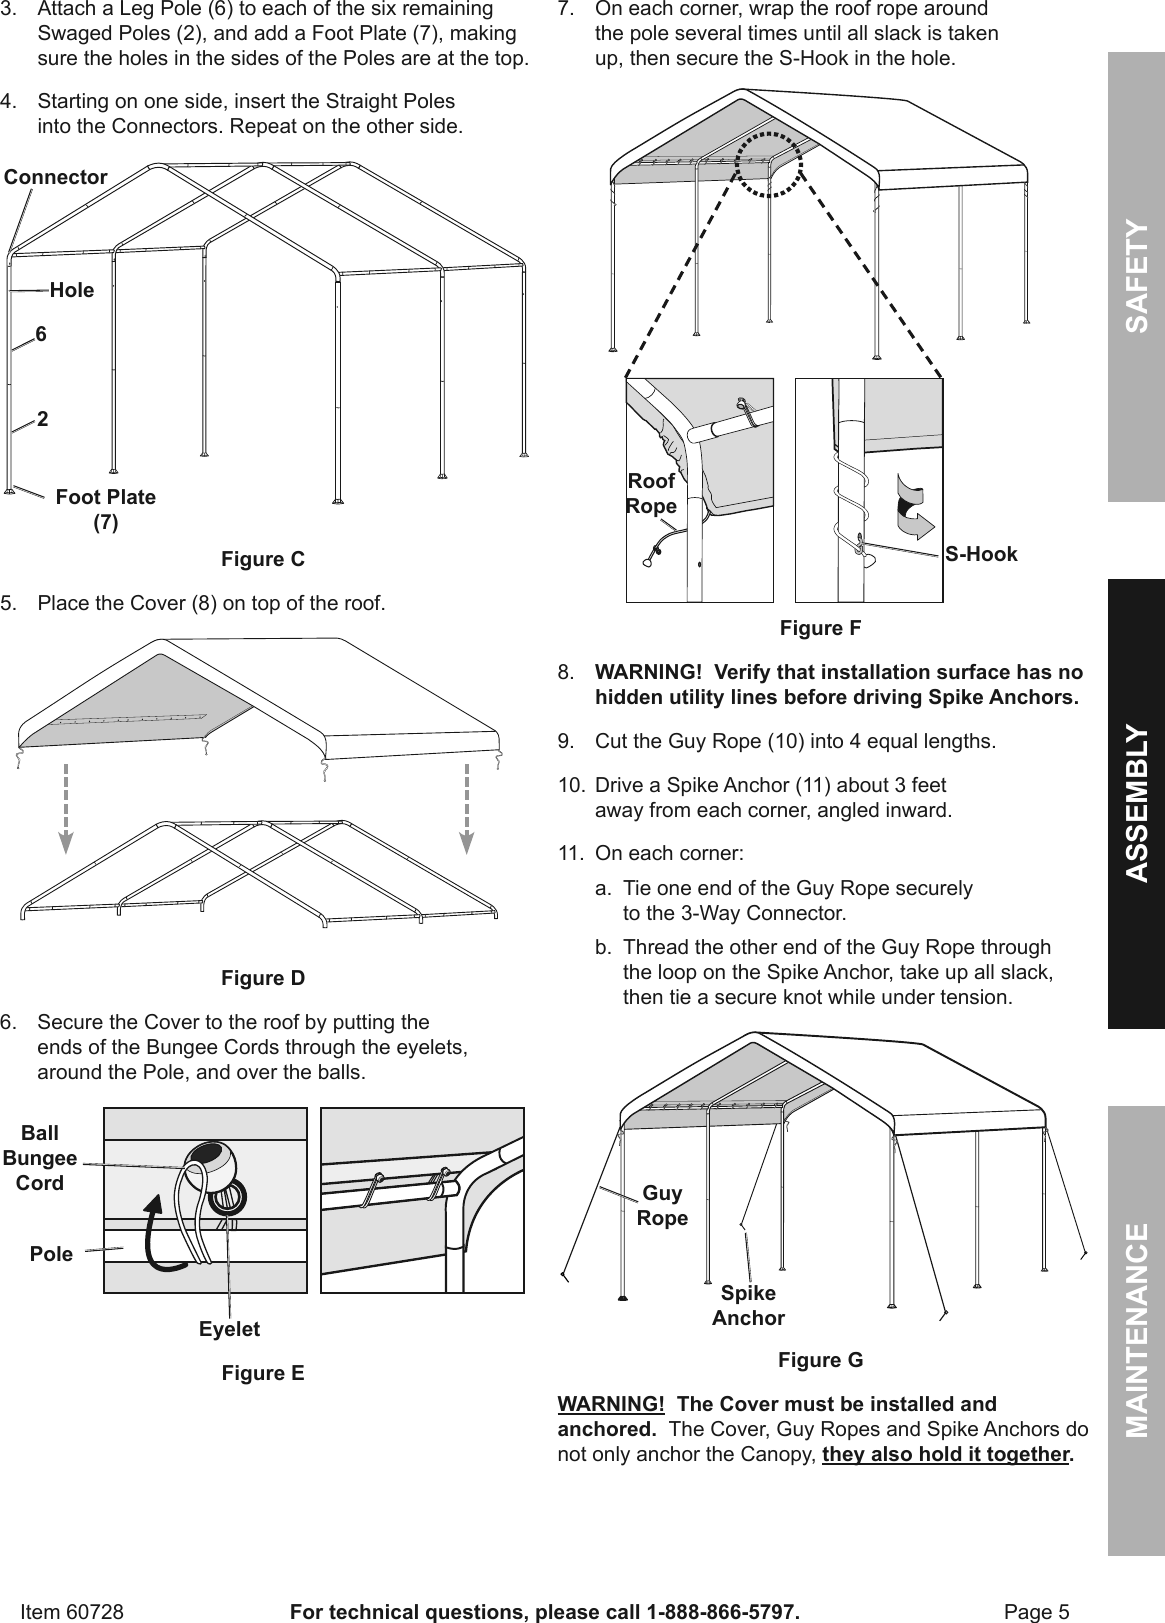 Harbor Freight 10 Ft X 20 Portable Car Canopy Product Manual - HarborFreight10FtX20FtPortableCarCanopyProDuctManual723505.1974103425 User GuiDe Page 5